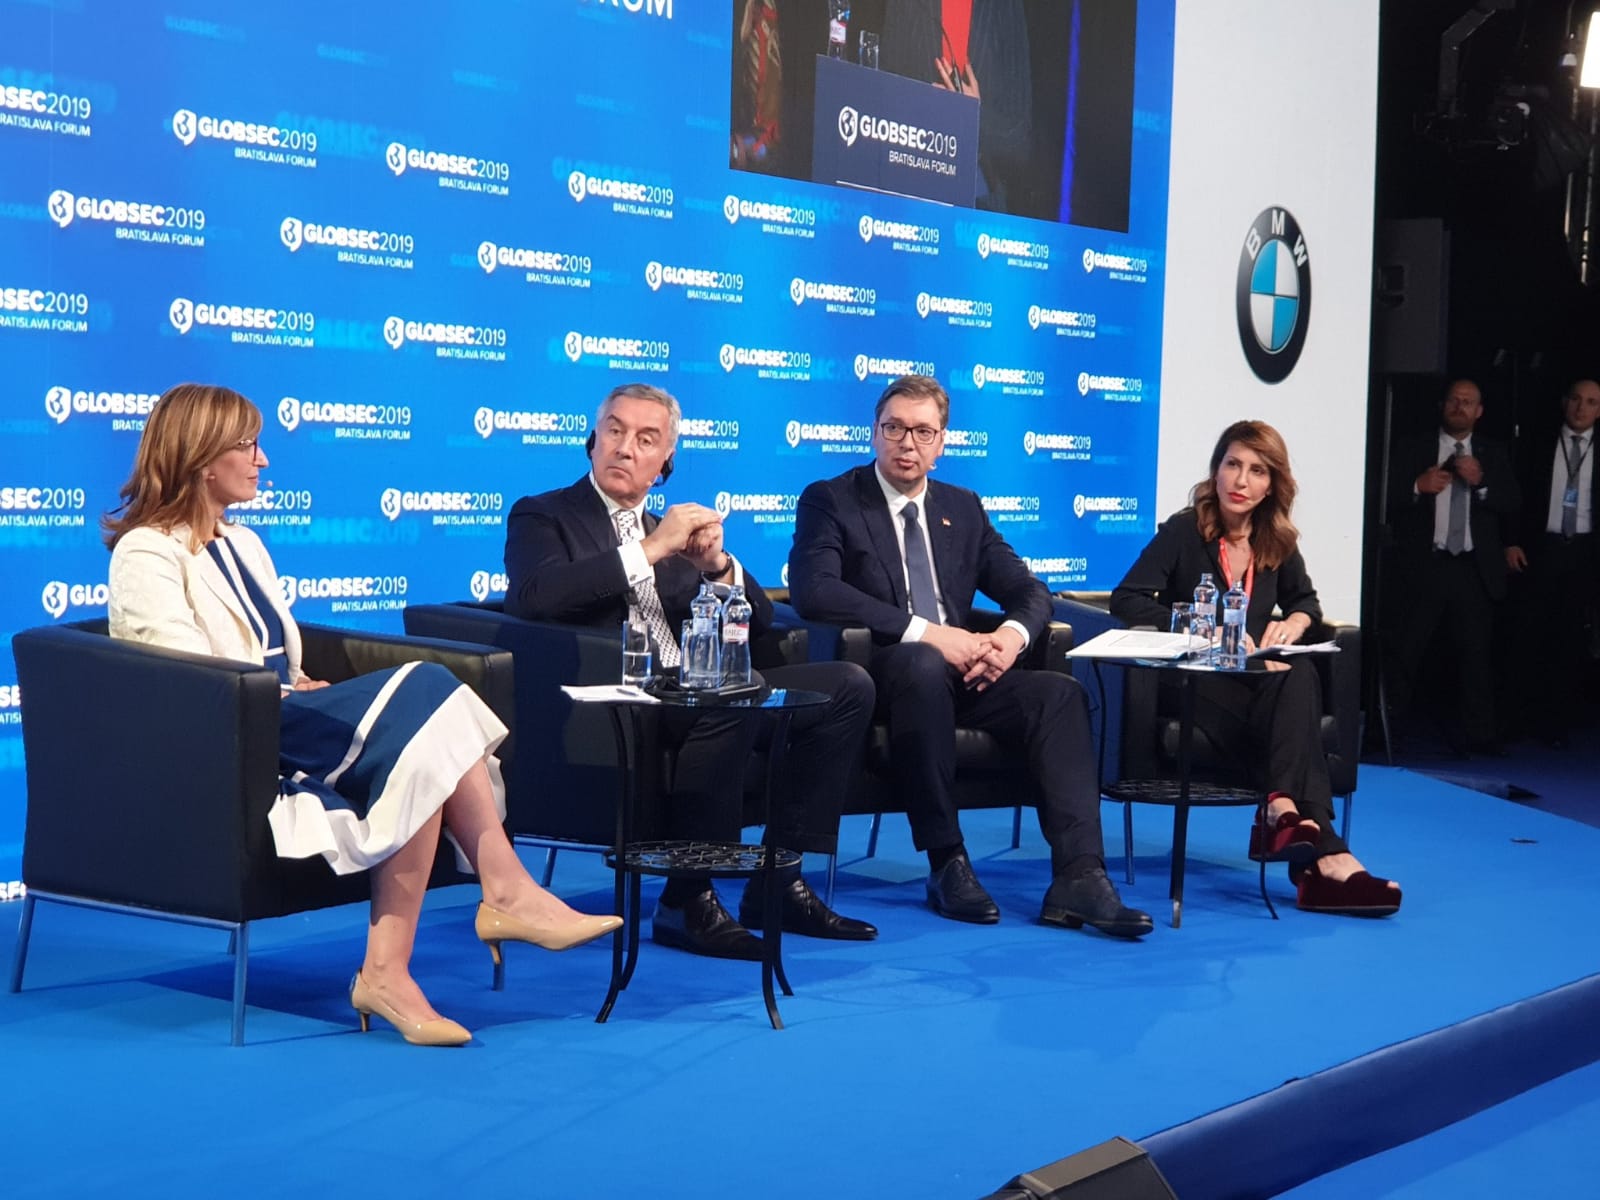 RCC Secretary General, Majlinda Bregu at the GLOBSEC 2019 Forum speaking at the panel ‘Western Balkans: drifting away from Europe?”, together with presidents of  Montenegro and Serbia, Milo Djukanovic and Aleksandar Vucic  and Bulgarian Minister of Foreign Affairs, Ekaterina Zaharieva, in Bratislava on 7 June 2019 (Photo: RCC/Ratka Babic)